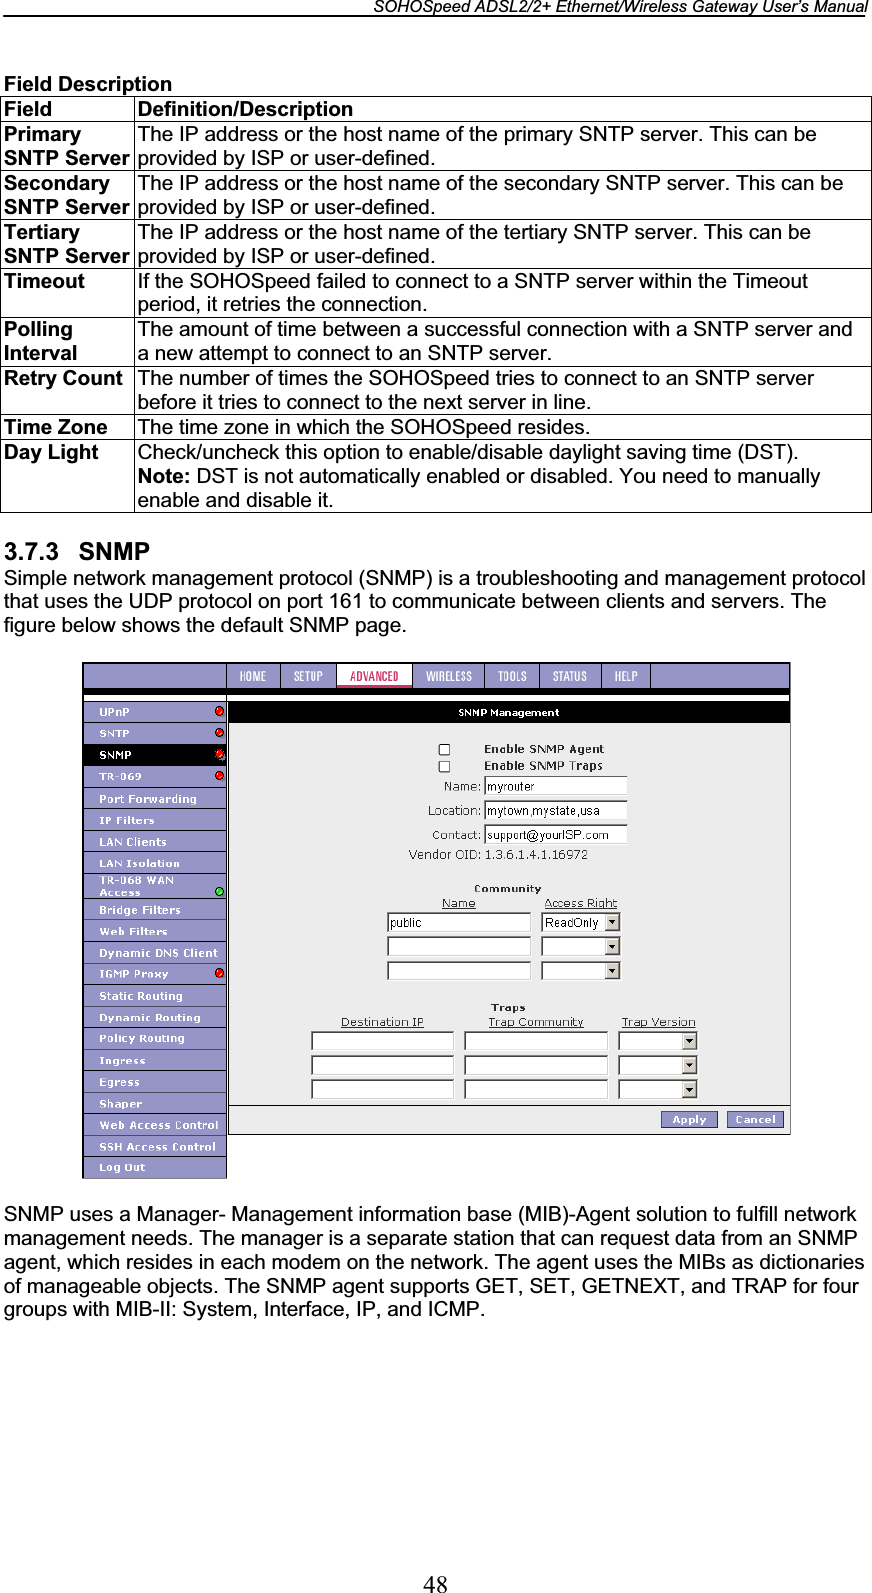 SOHOSpeed ADSL2/2+ Ethernet/Wireless Gateway User’s Manual 48Field Description Field Definition/Description Primary SNTP Server The IP address or the host name of the primary SNTP server. This can be provided by ISP or user-defined. Secondary SNTP Server The IP address or the host name of the secondary SNTP server. This can be provided by ISP or user-defined. Tertiary SNTP Server The IP address or the host name of the tertiary SNTP server. This can be provided by ISP or user-defined. Timeout If the SOHOSpeed failed to connect to a SNTP server within the Timeout period, it retries the connection. PollingInterval The amount of time between a successful connection with a SNTP server and a new attempt to connect to an SNTP server. Retry Count  The number of times the SOHOSpeed tries to connect to an SNTP server before it tries to connect to the next server in line. Time Zone  The time zone in which the SOHOSpeed resides. Day Light  Check/uncheck this option to enable/disable daylight saving time (DST). Note: DST is not automatically enabled or disabled. You need to manually enable and disable it. 3.7.3 SNMP Simple network management protocol (SNMP) is a troubleshooting and management protocol that uses the UDP protocol on port 161 to communicate between clients and servers. The figure below shows the default SNMP page. SNMP uses a Manager- Management information base (MIB)-Agent solution to fulfill network management needs. The manager is a separate station that can request data from an SNMP agent, which resides in each modem on the network. The agent uses the MIBs as dictionaries of manageable objects. The SNMP agent supports GET, SET, GETNEXT, and TRAP for four groups with MIB-II: System, Interface, IP, and ICMP. 